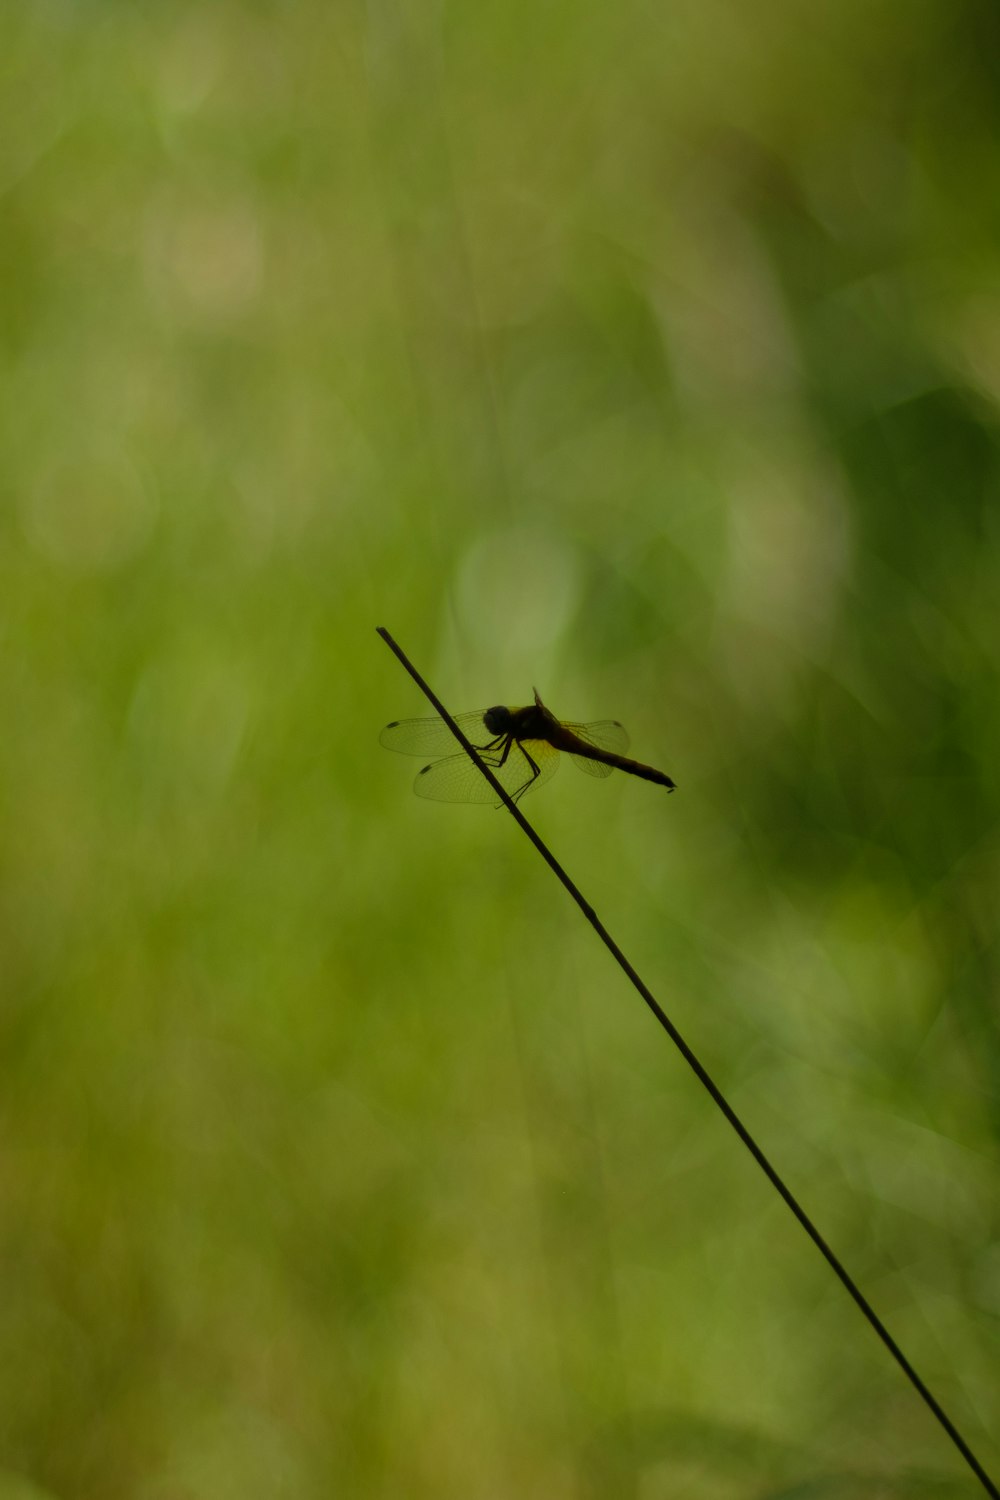 black dragonfly perched on green grass in close up photography during daytime